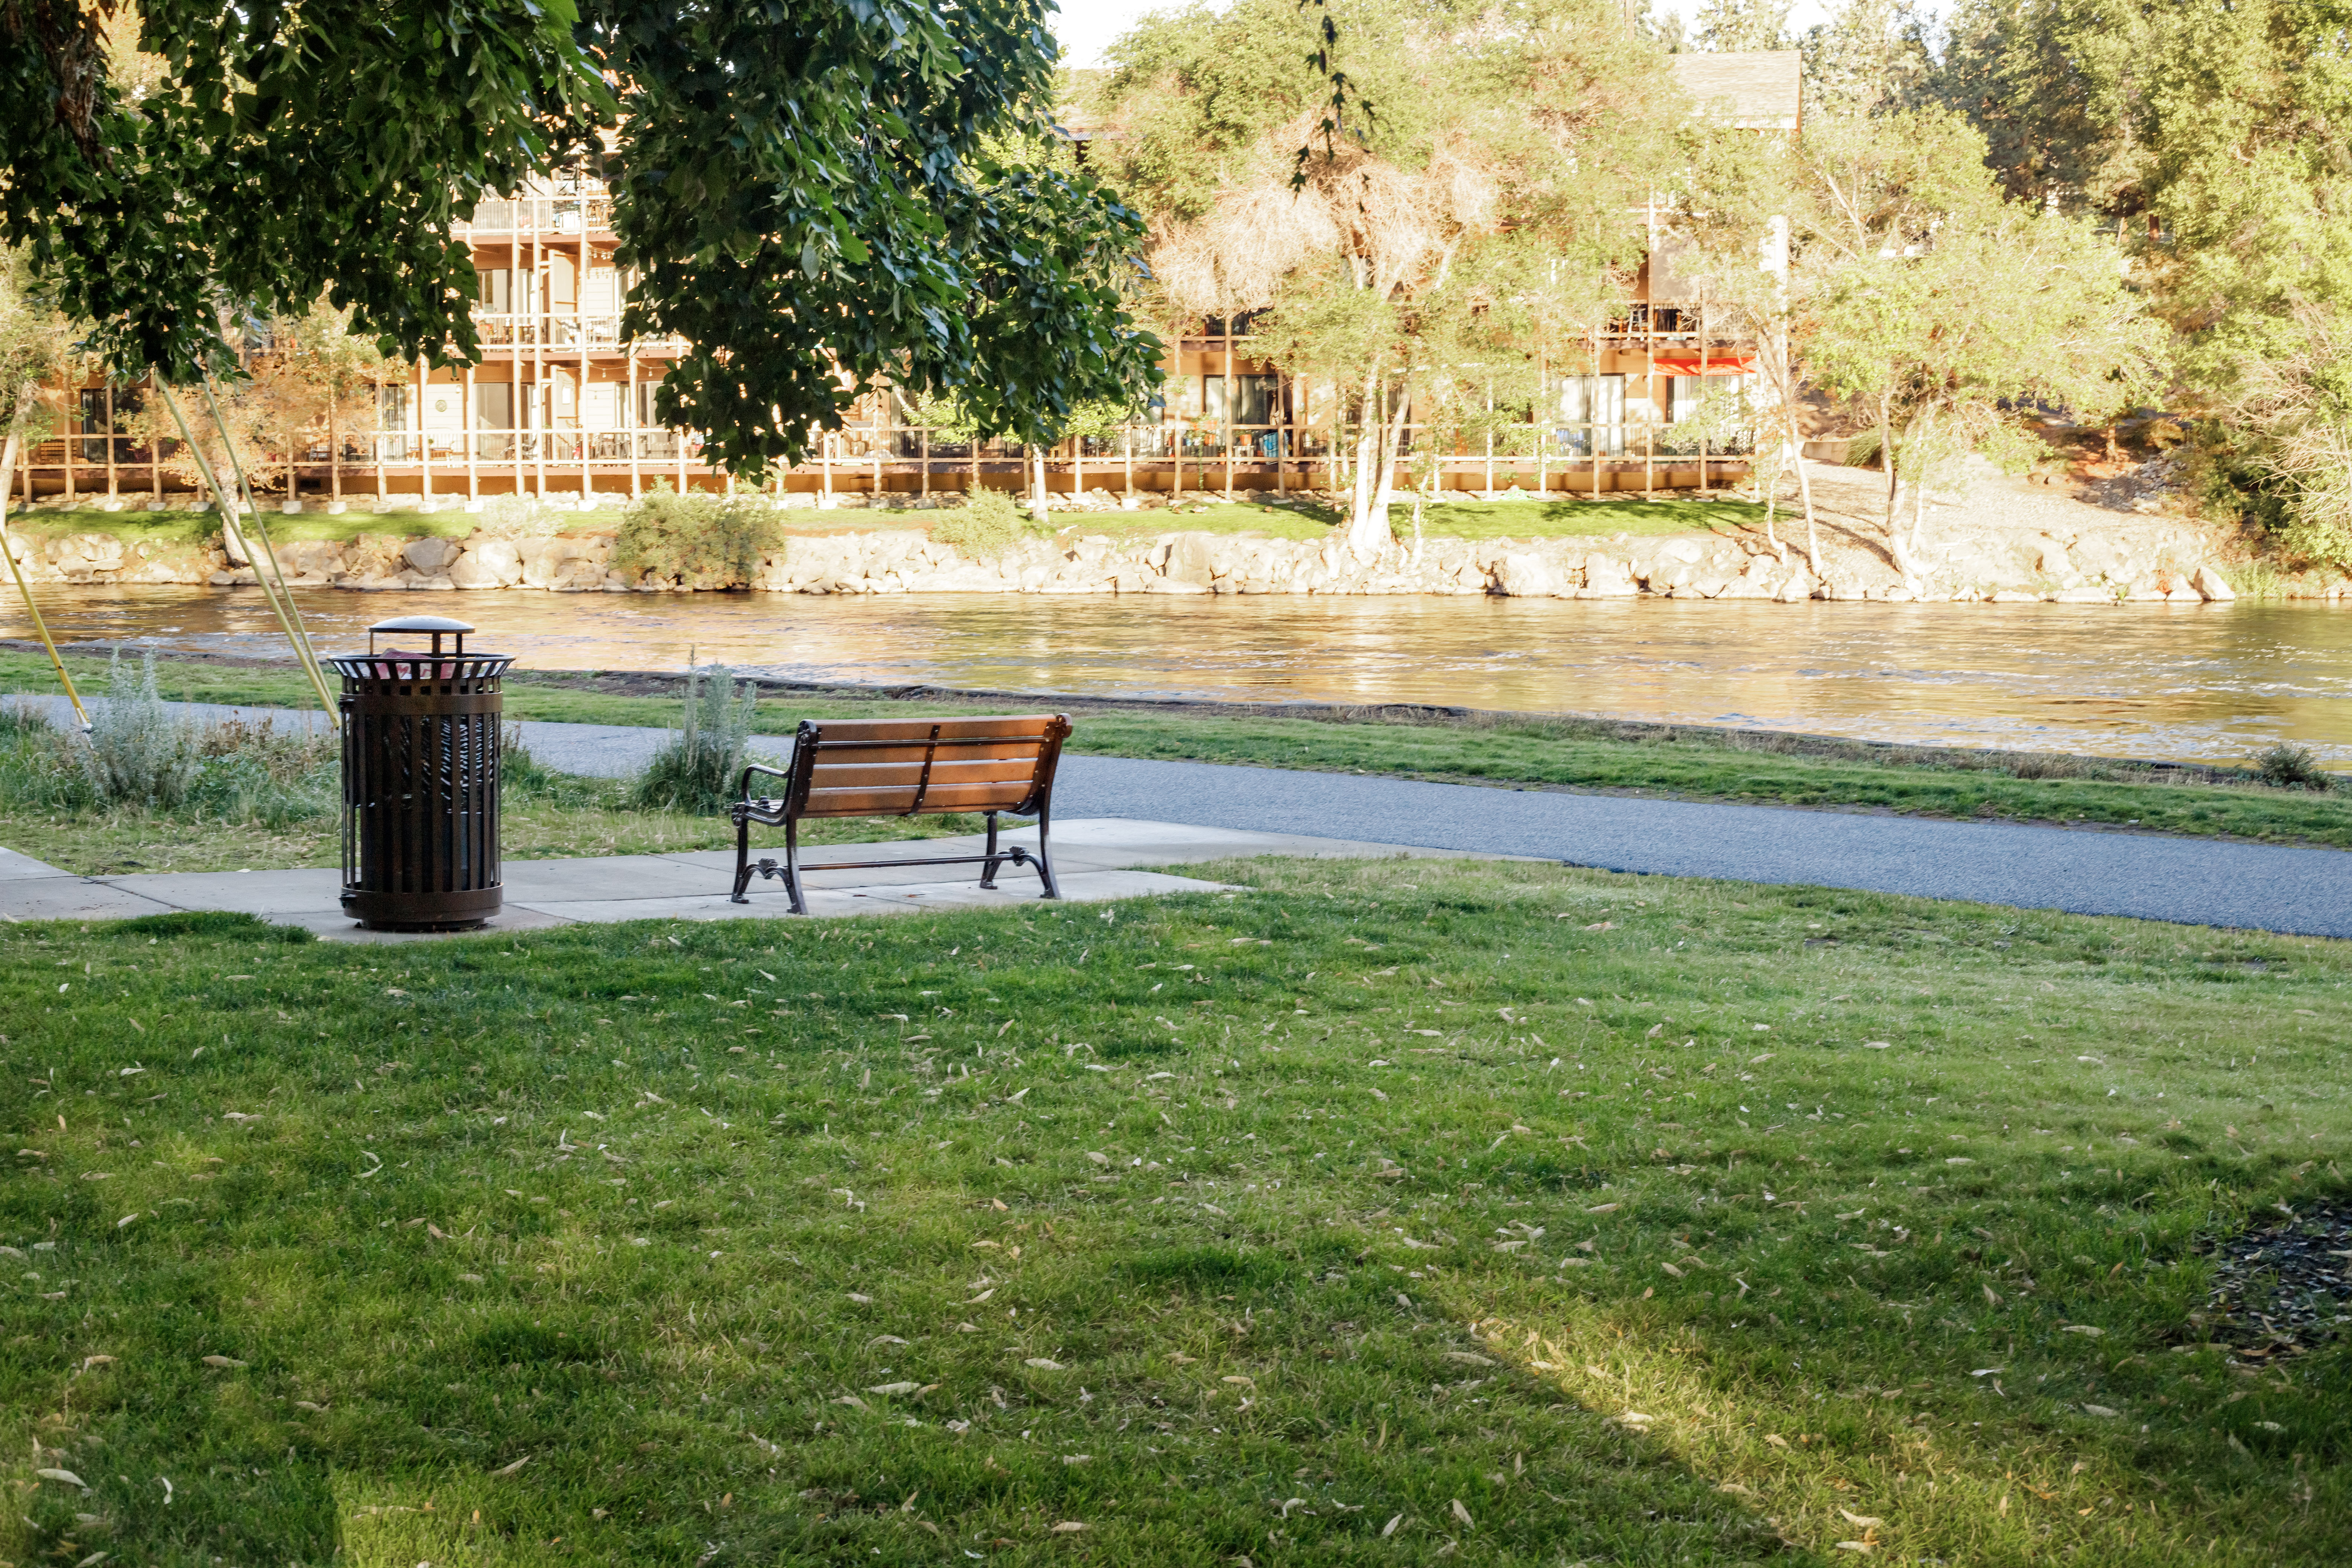 A bench for viewing the river